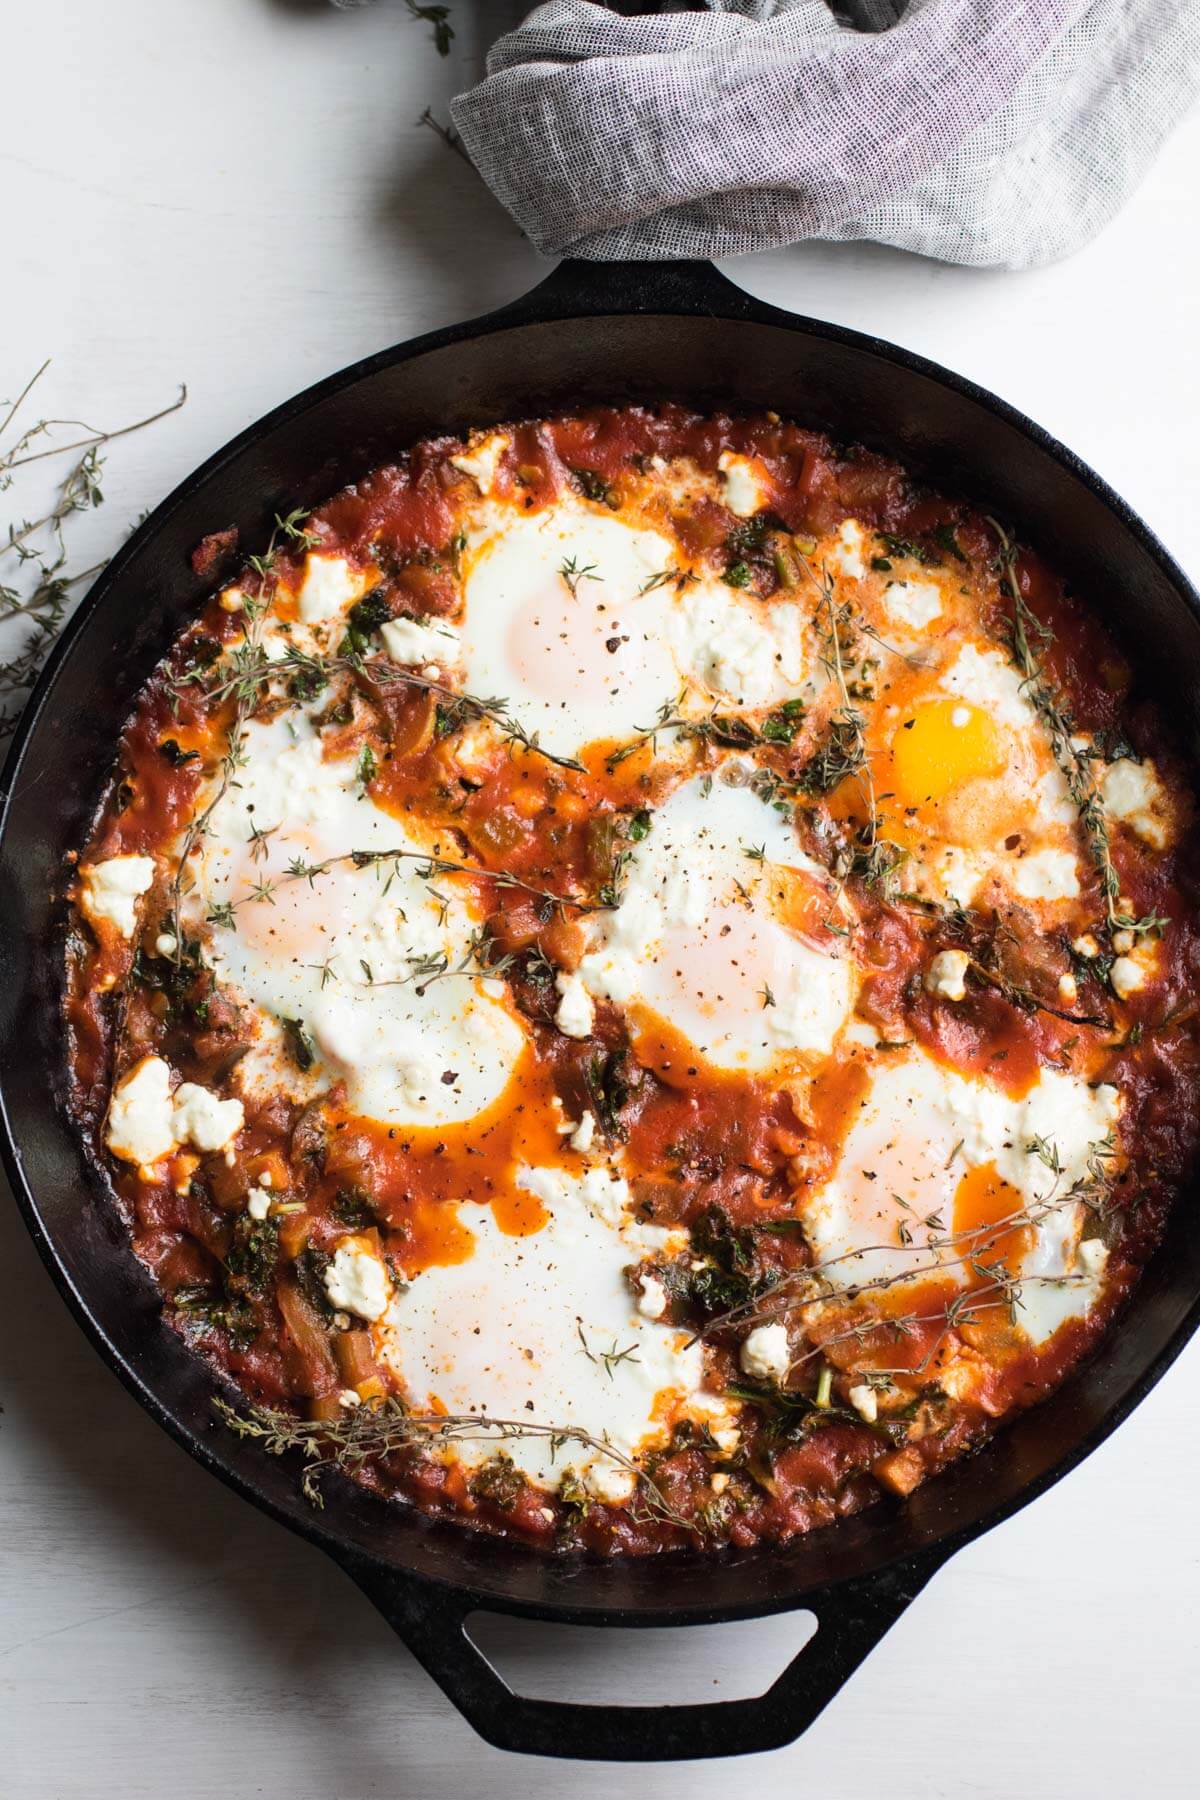 Ratatouille Shakshuka with Kale and Feta Cheese, eggs poached in a spicy tomato ratatouille sauce and topped with feta cheese. The PERFECT brunch dish. Gluten-free.